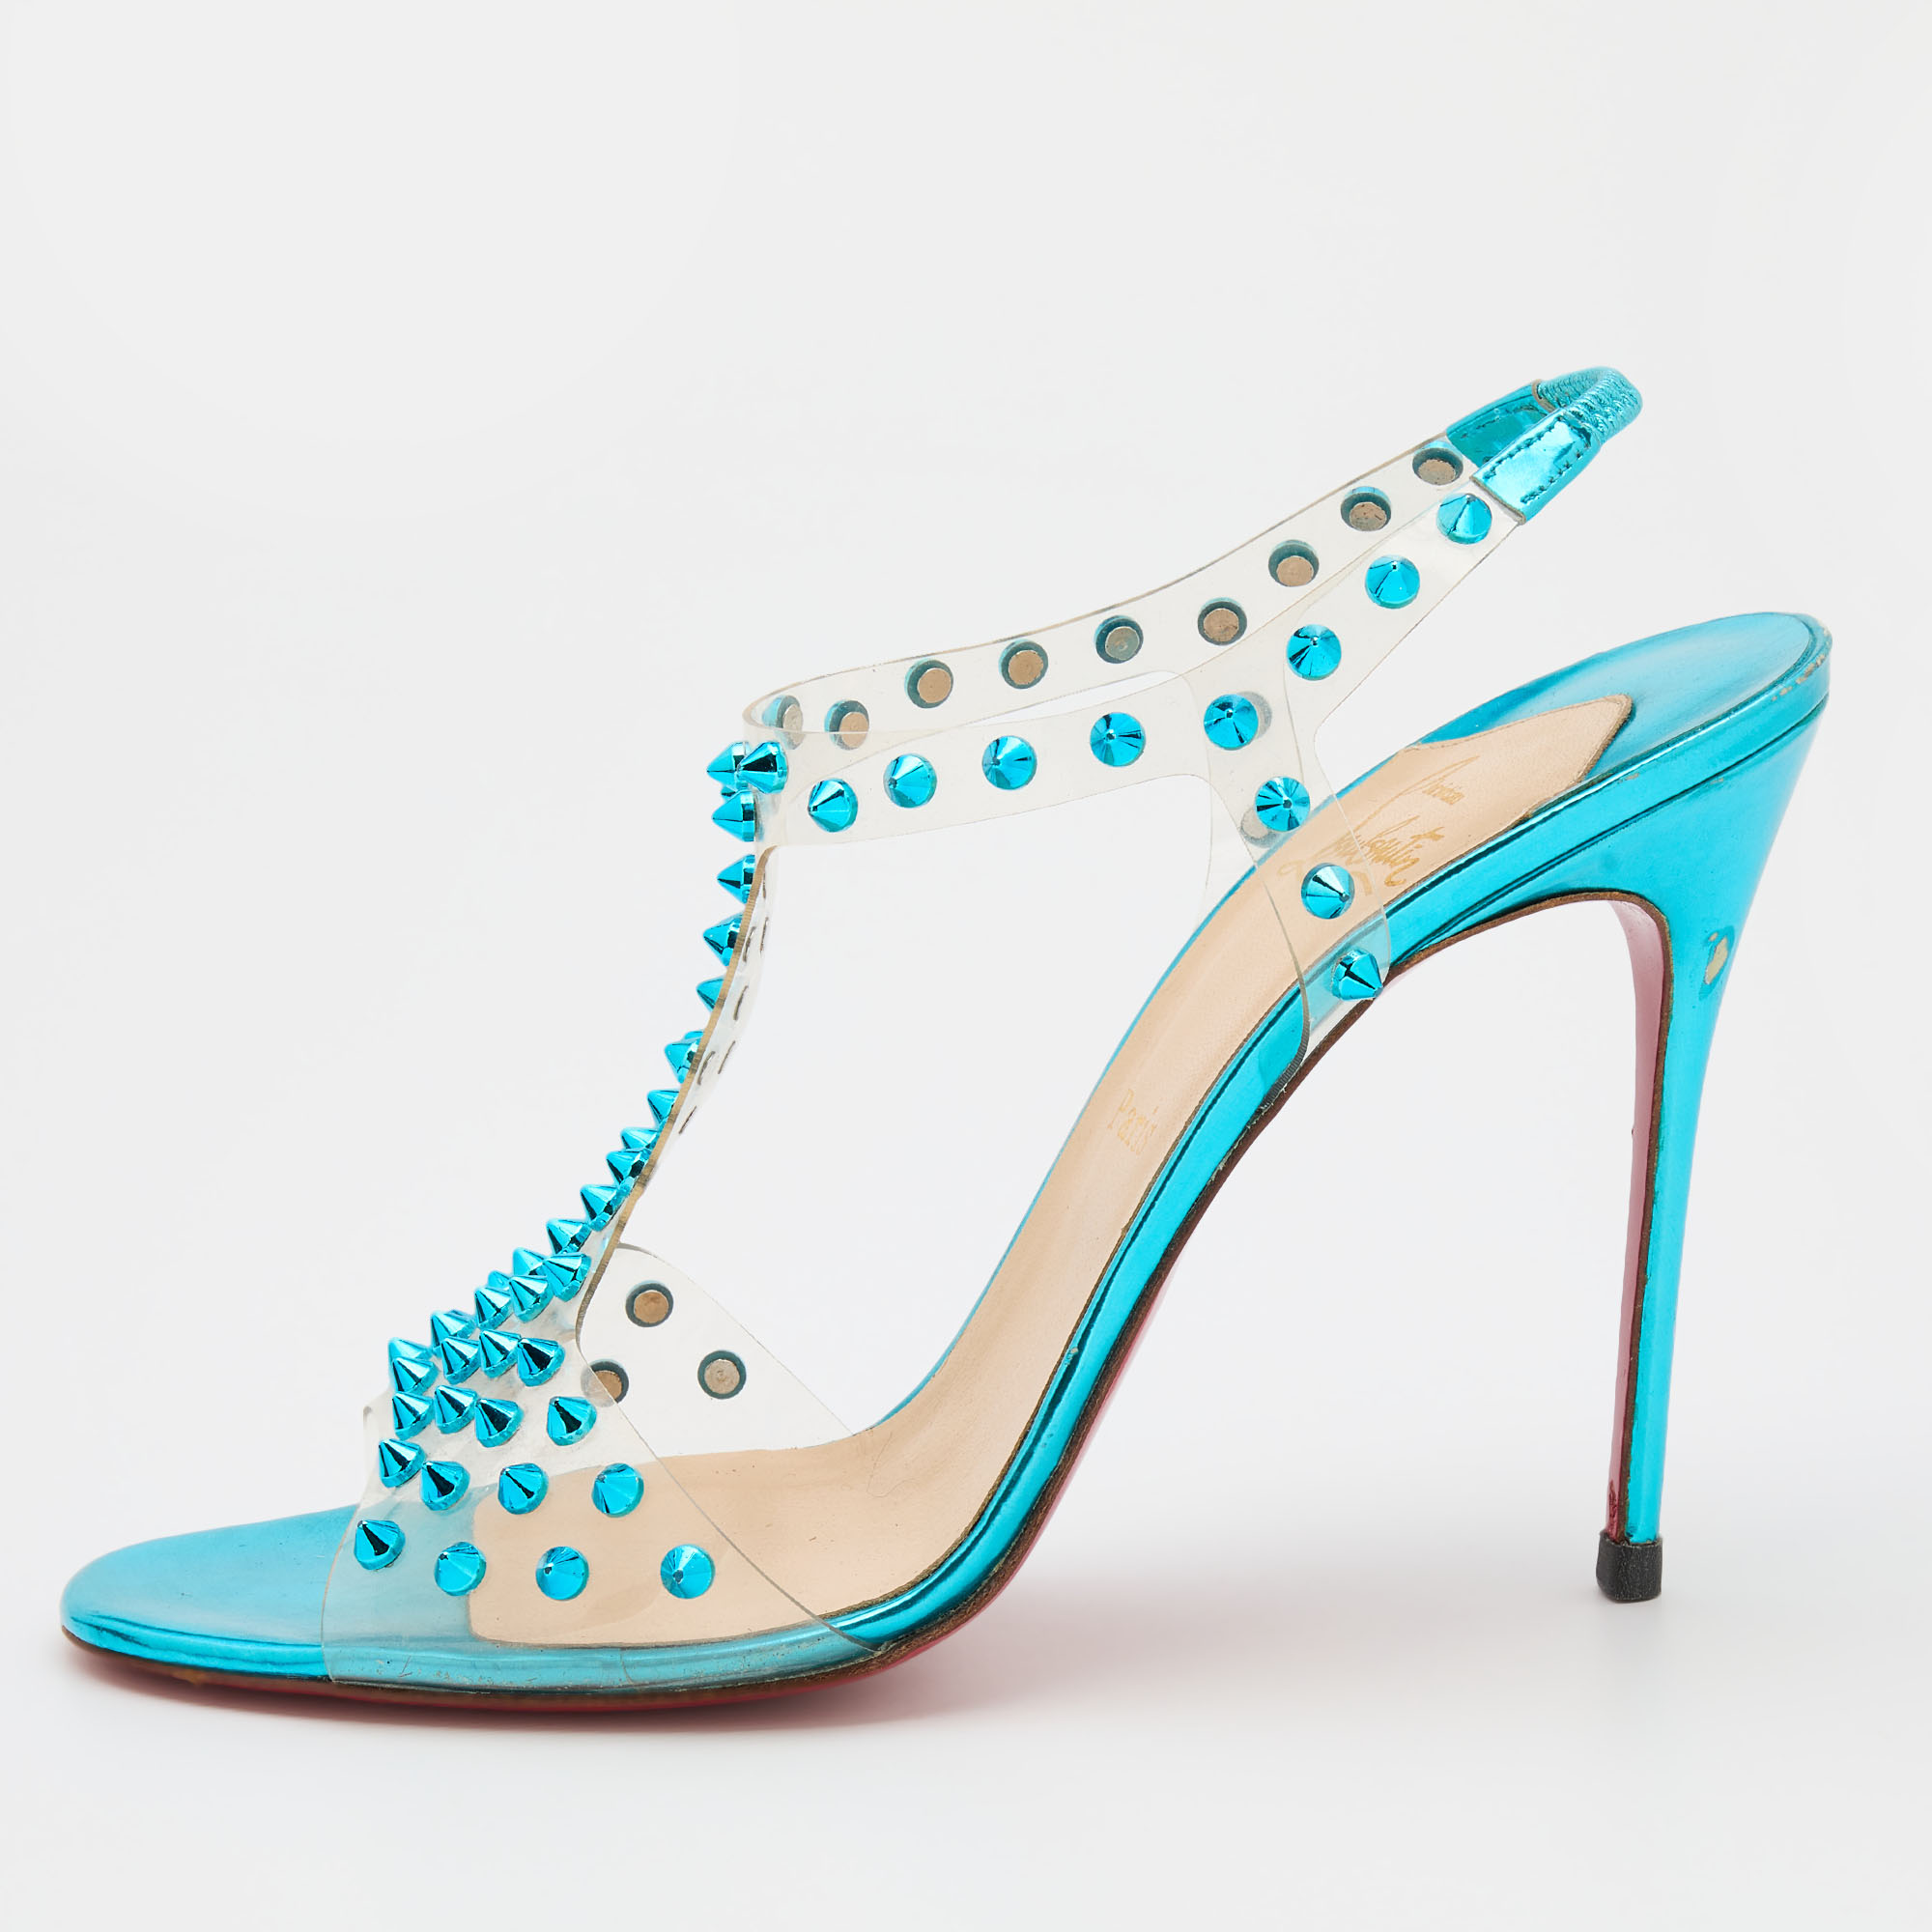 Christian louboutin transparent/turquoise pvc and leather spike j lissimo slingback sandals size 41